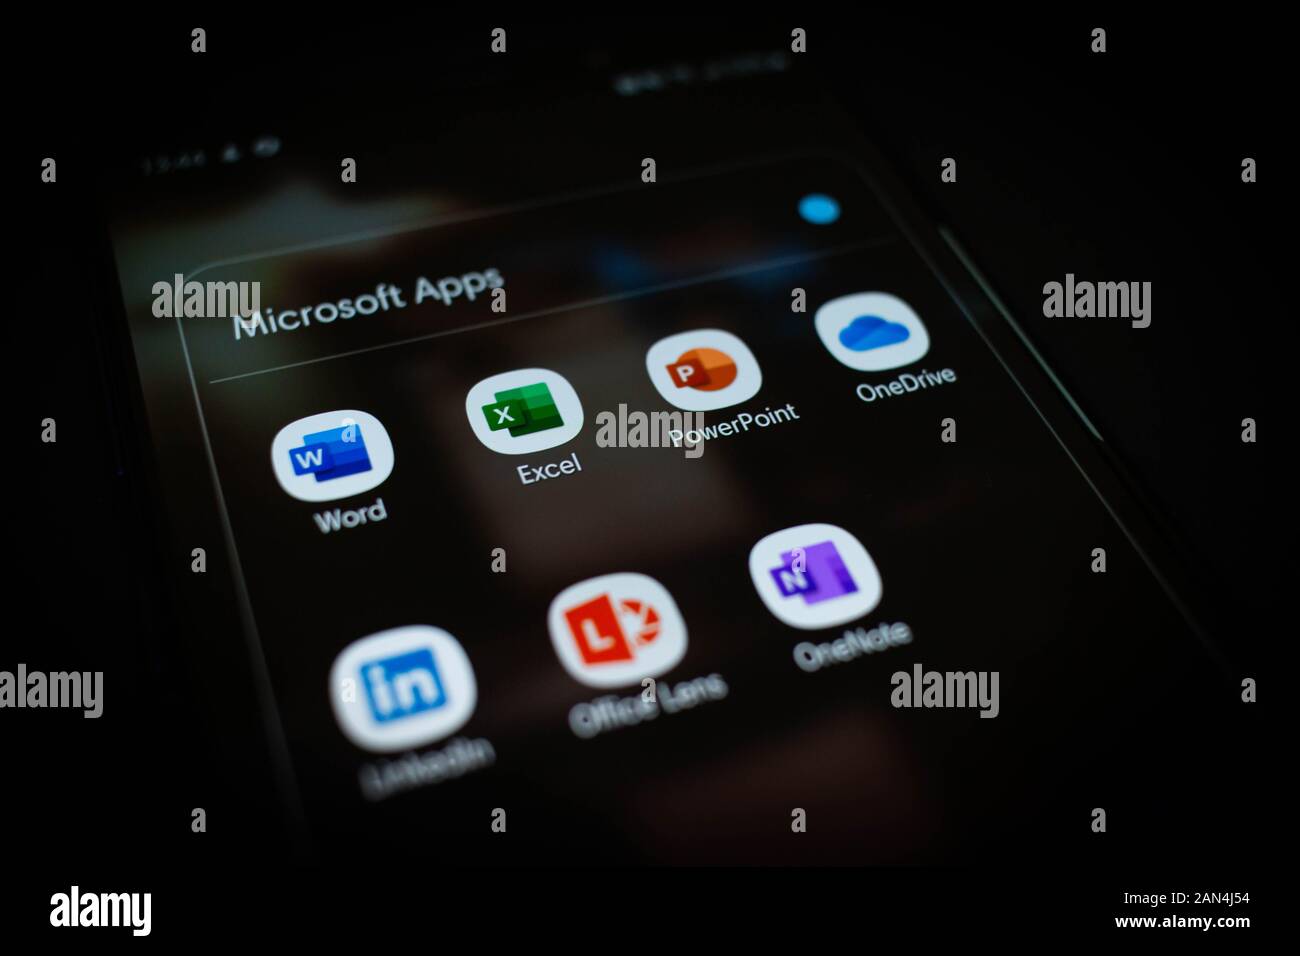 Picture of Microsoft Office 365 for Android (MS Word, Excel, PowerPoint, OneDrive, Lens, OneNote) and LinkedIn Stock Photo